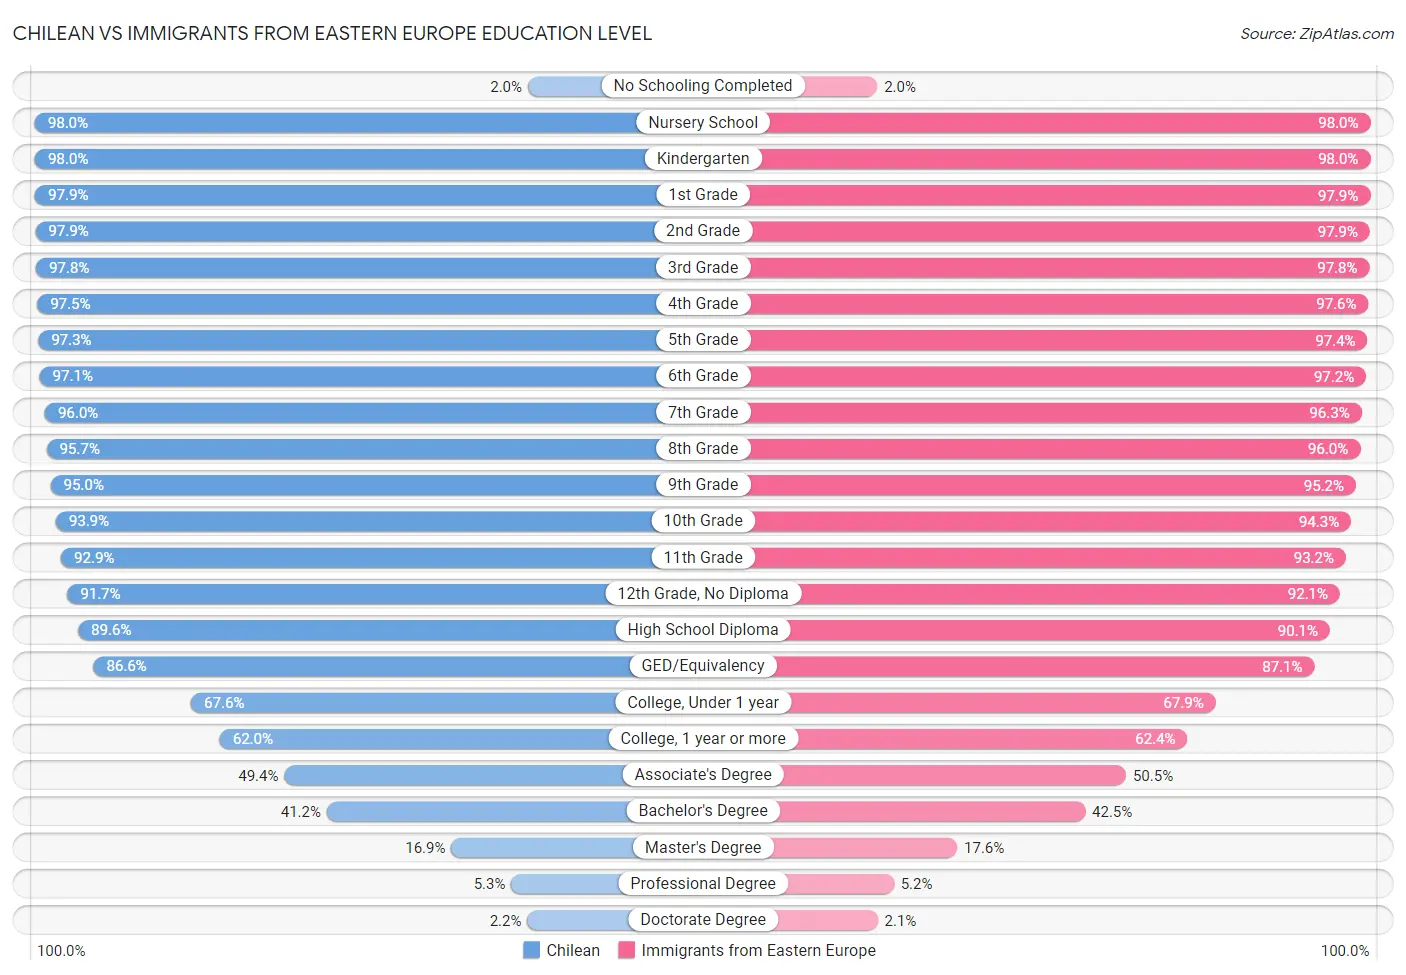 Chilean vs Immigrants from Eastern Europe Education Level